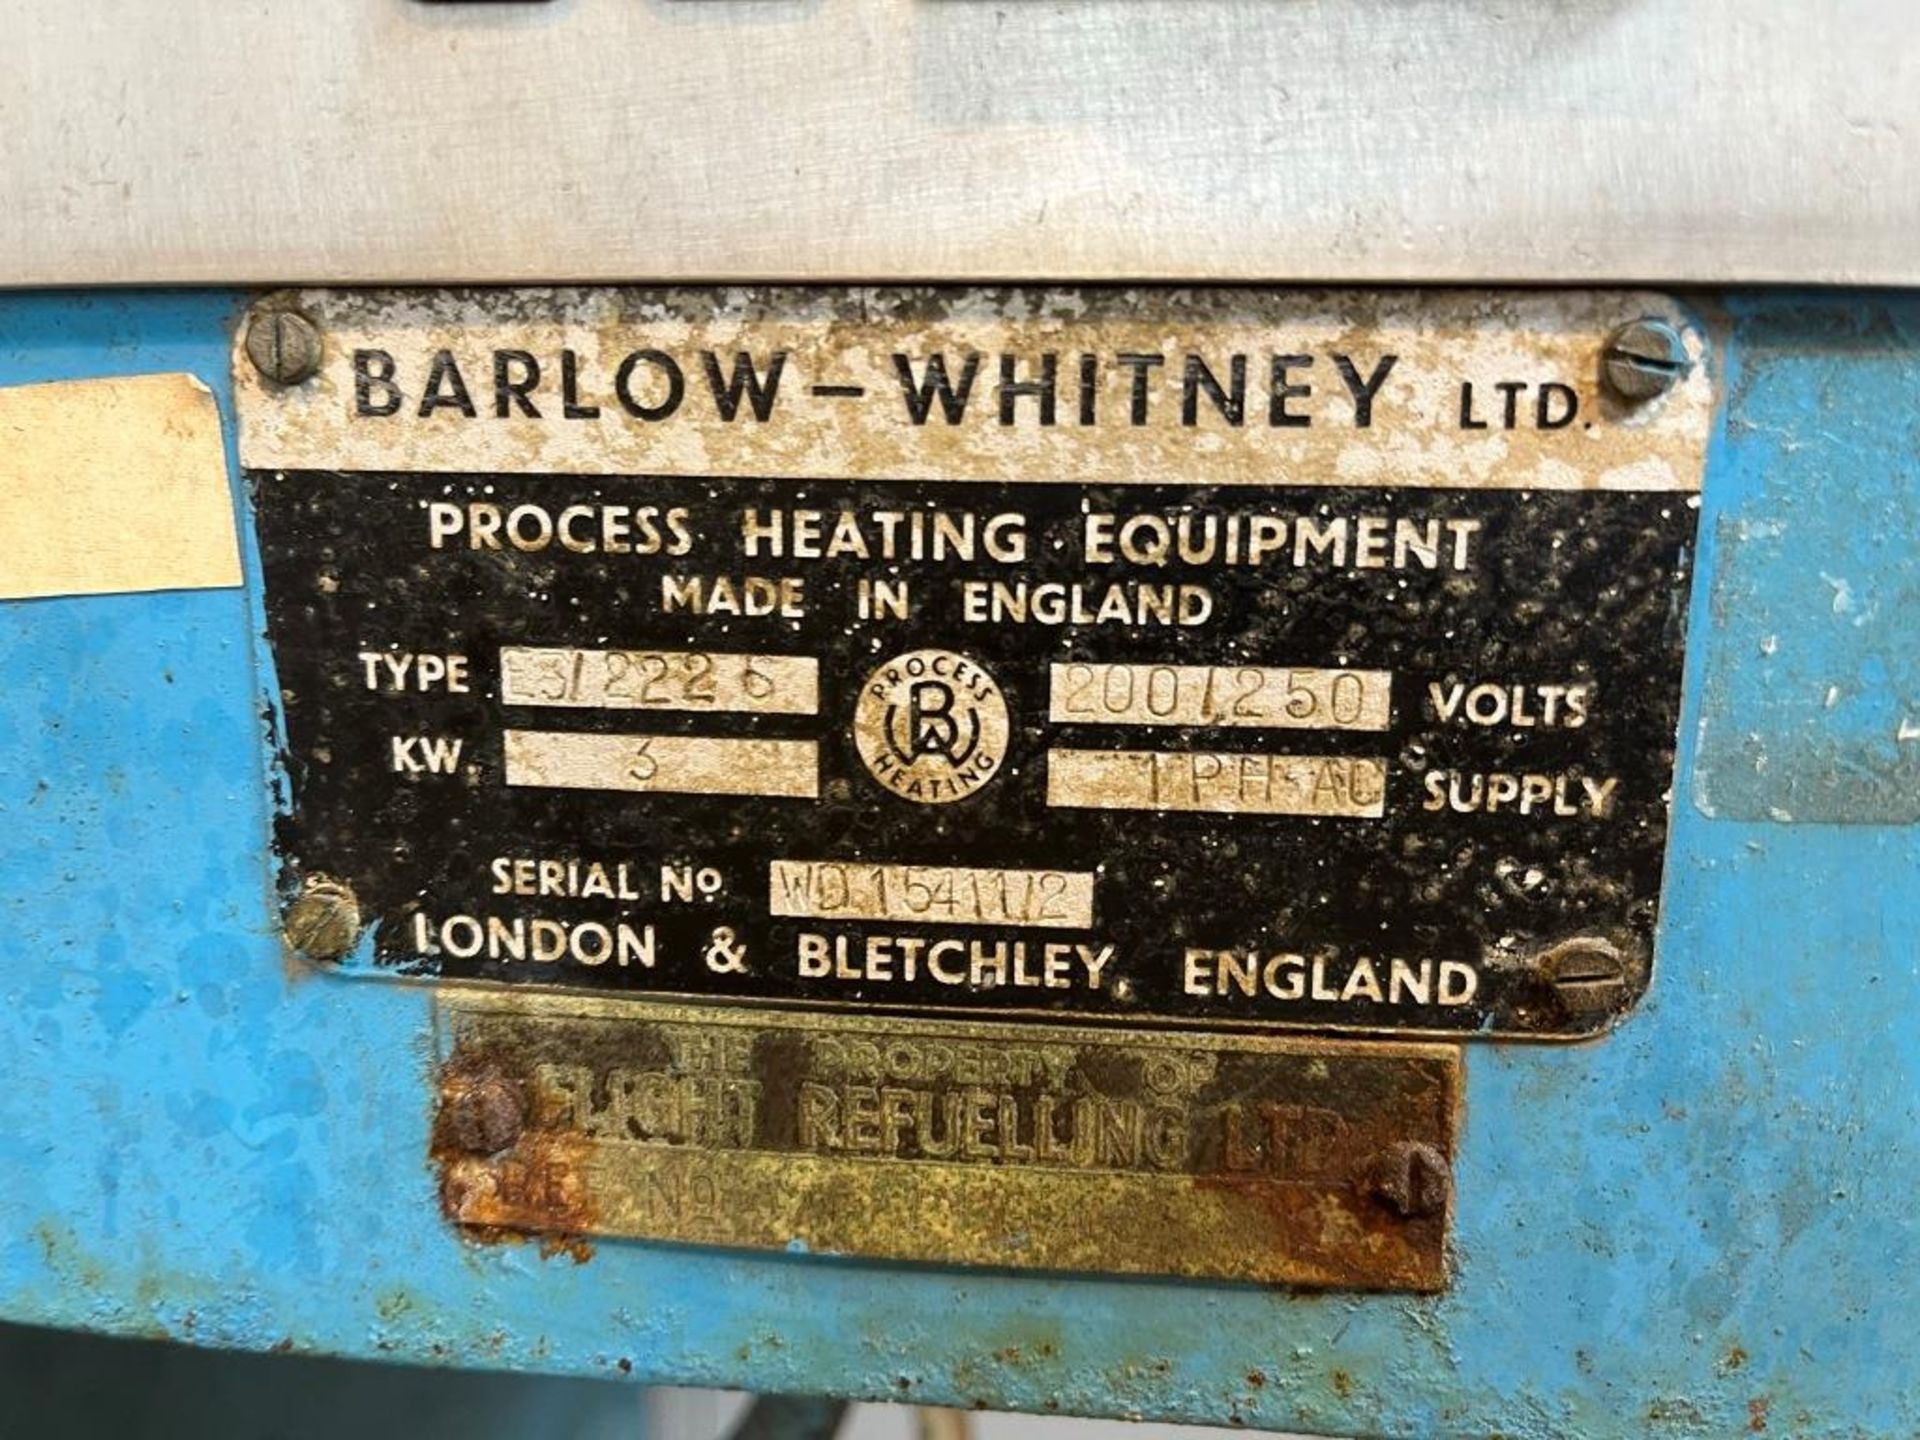 Barlow Whitney E3/2226 curing oven, Serial No. WD15411/2, Please note: A work Method Statement and - Image 2 of 2